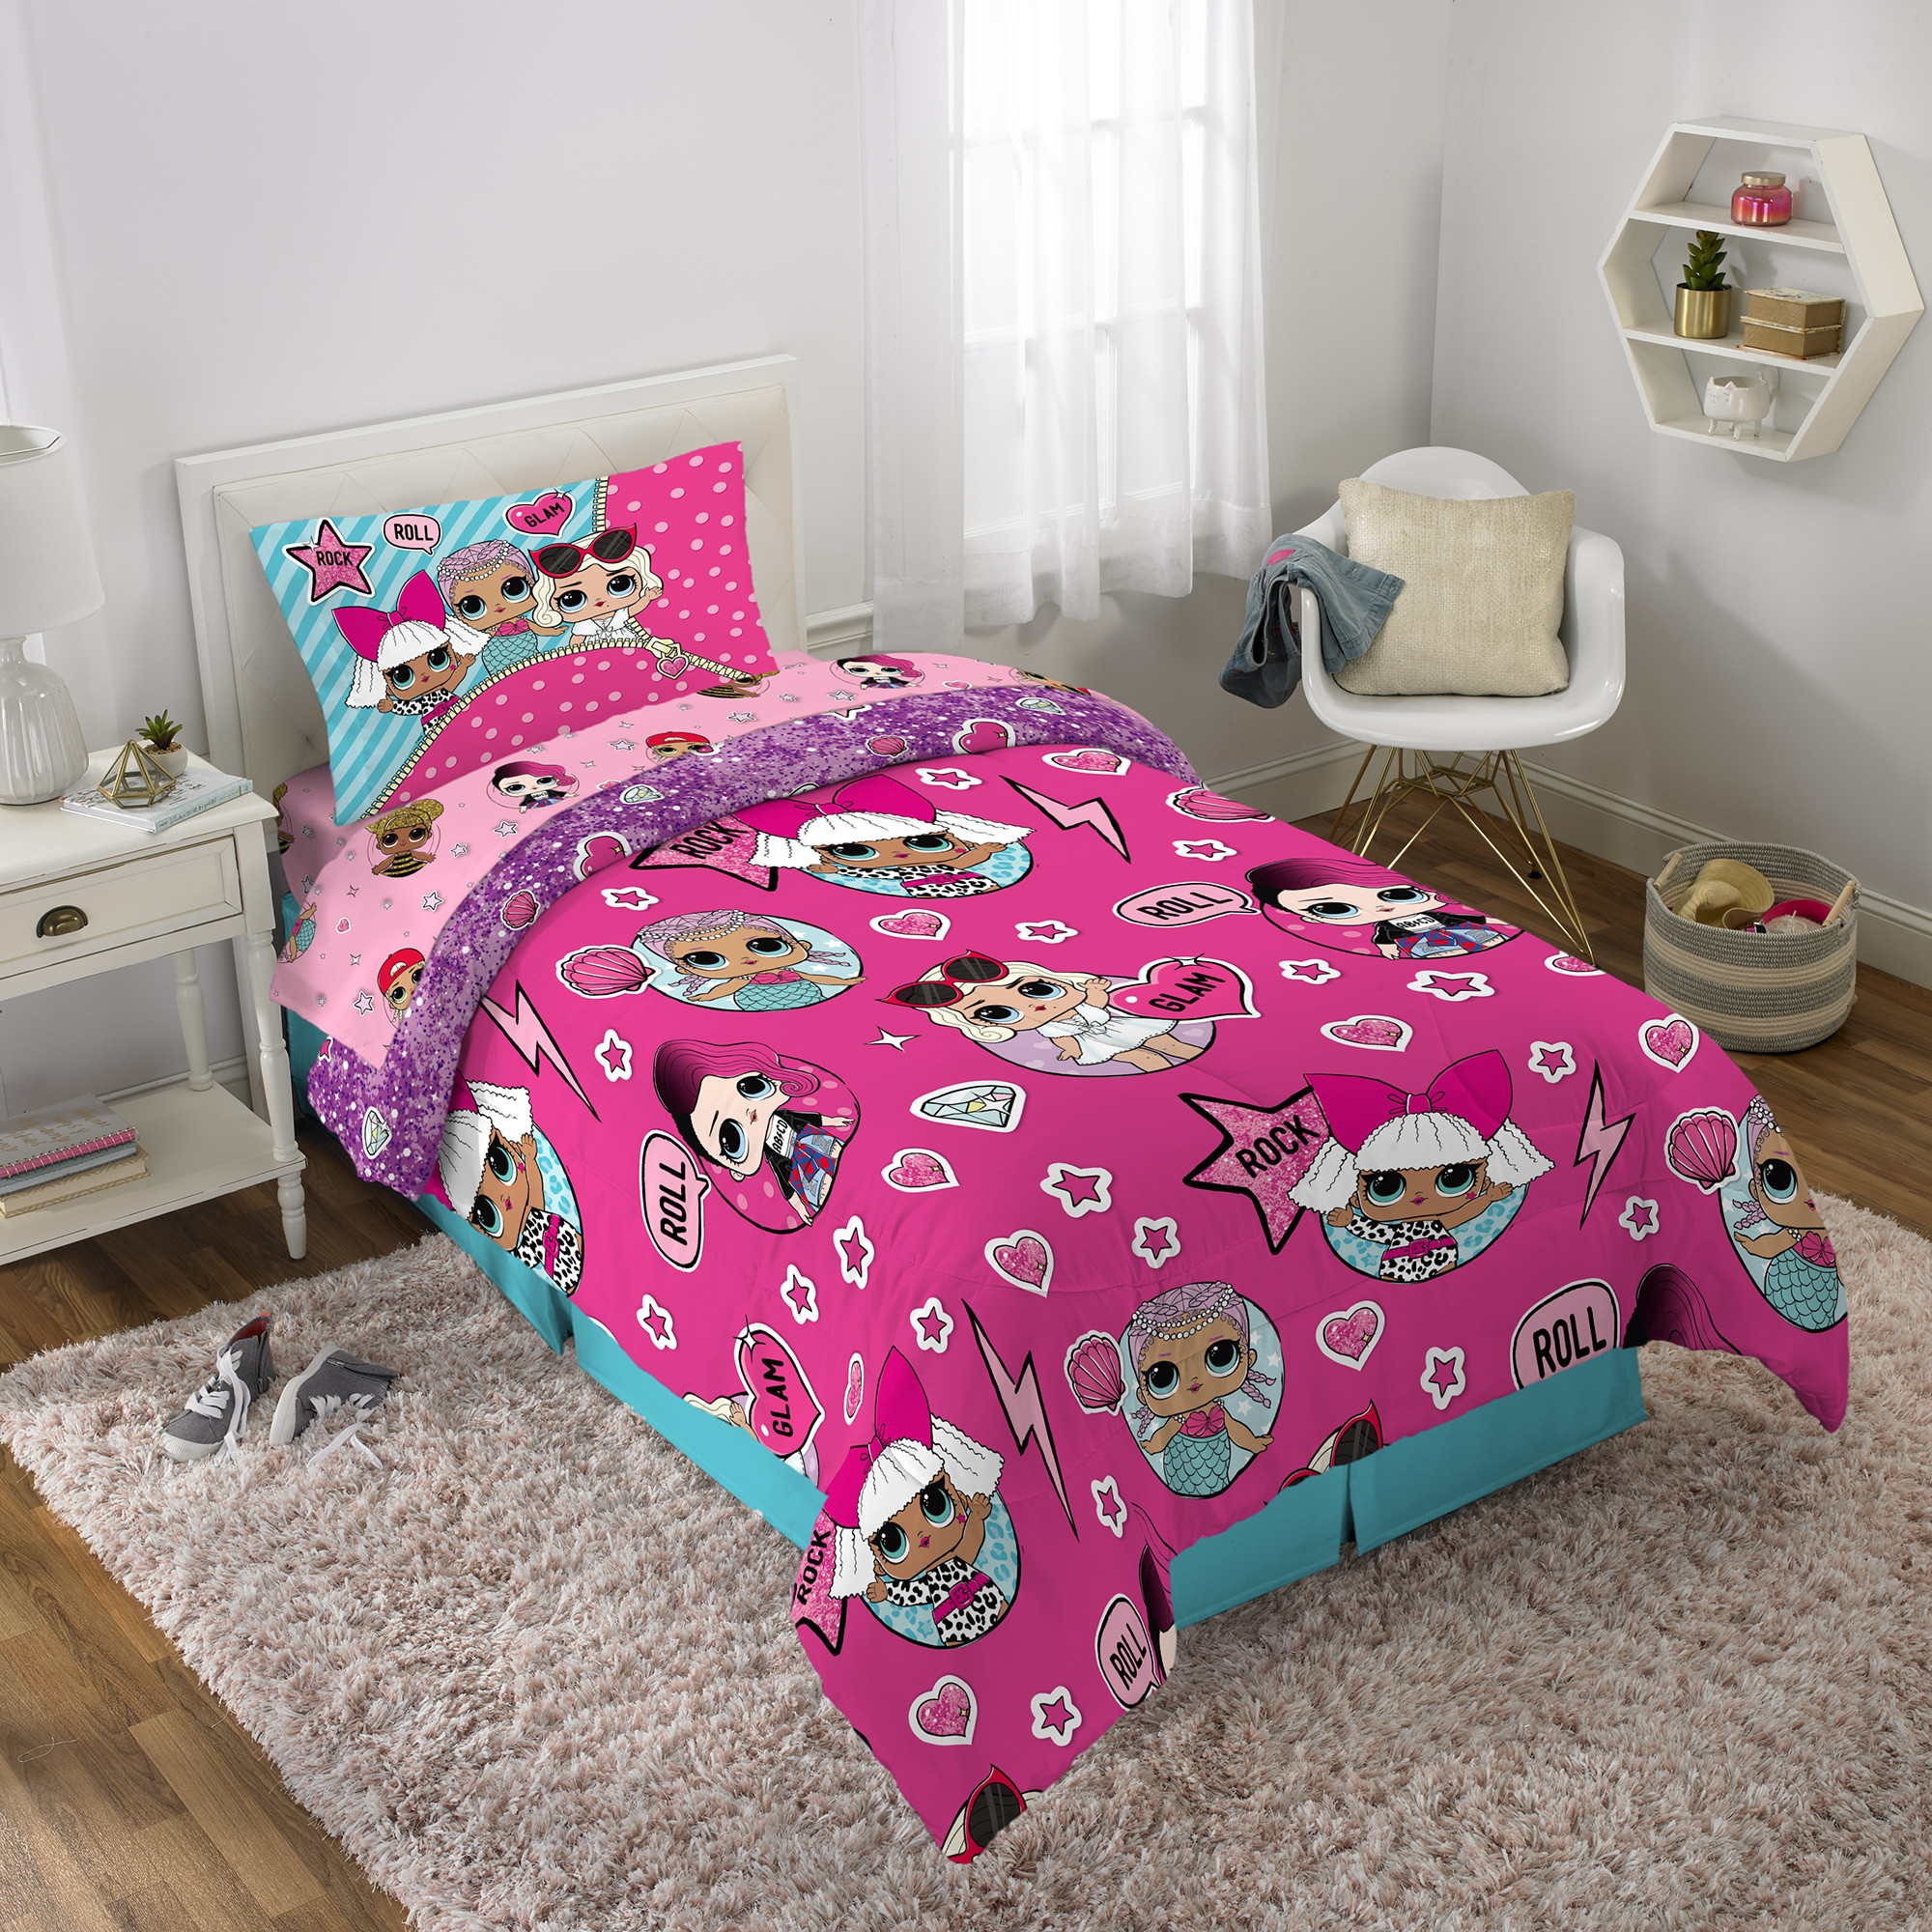 Walmart Girl Bedroom Sets
 L O L Surprise 5Pc Bedding Set Twin Bed in a Bag with